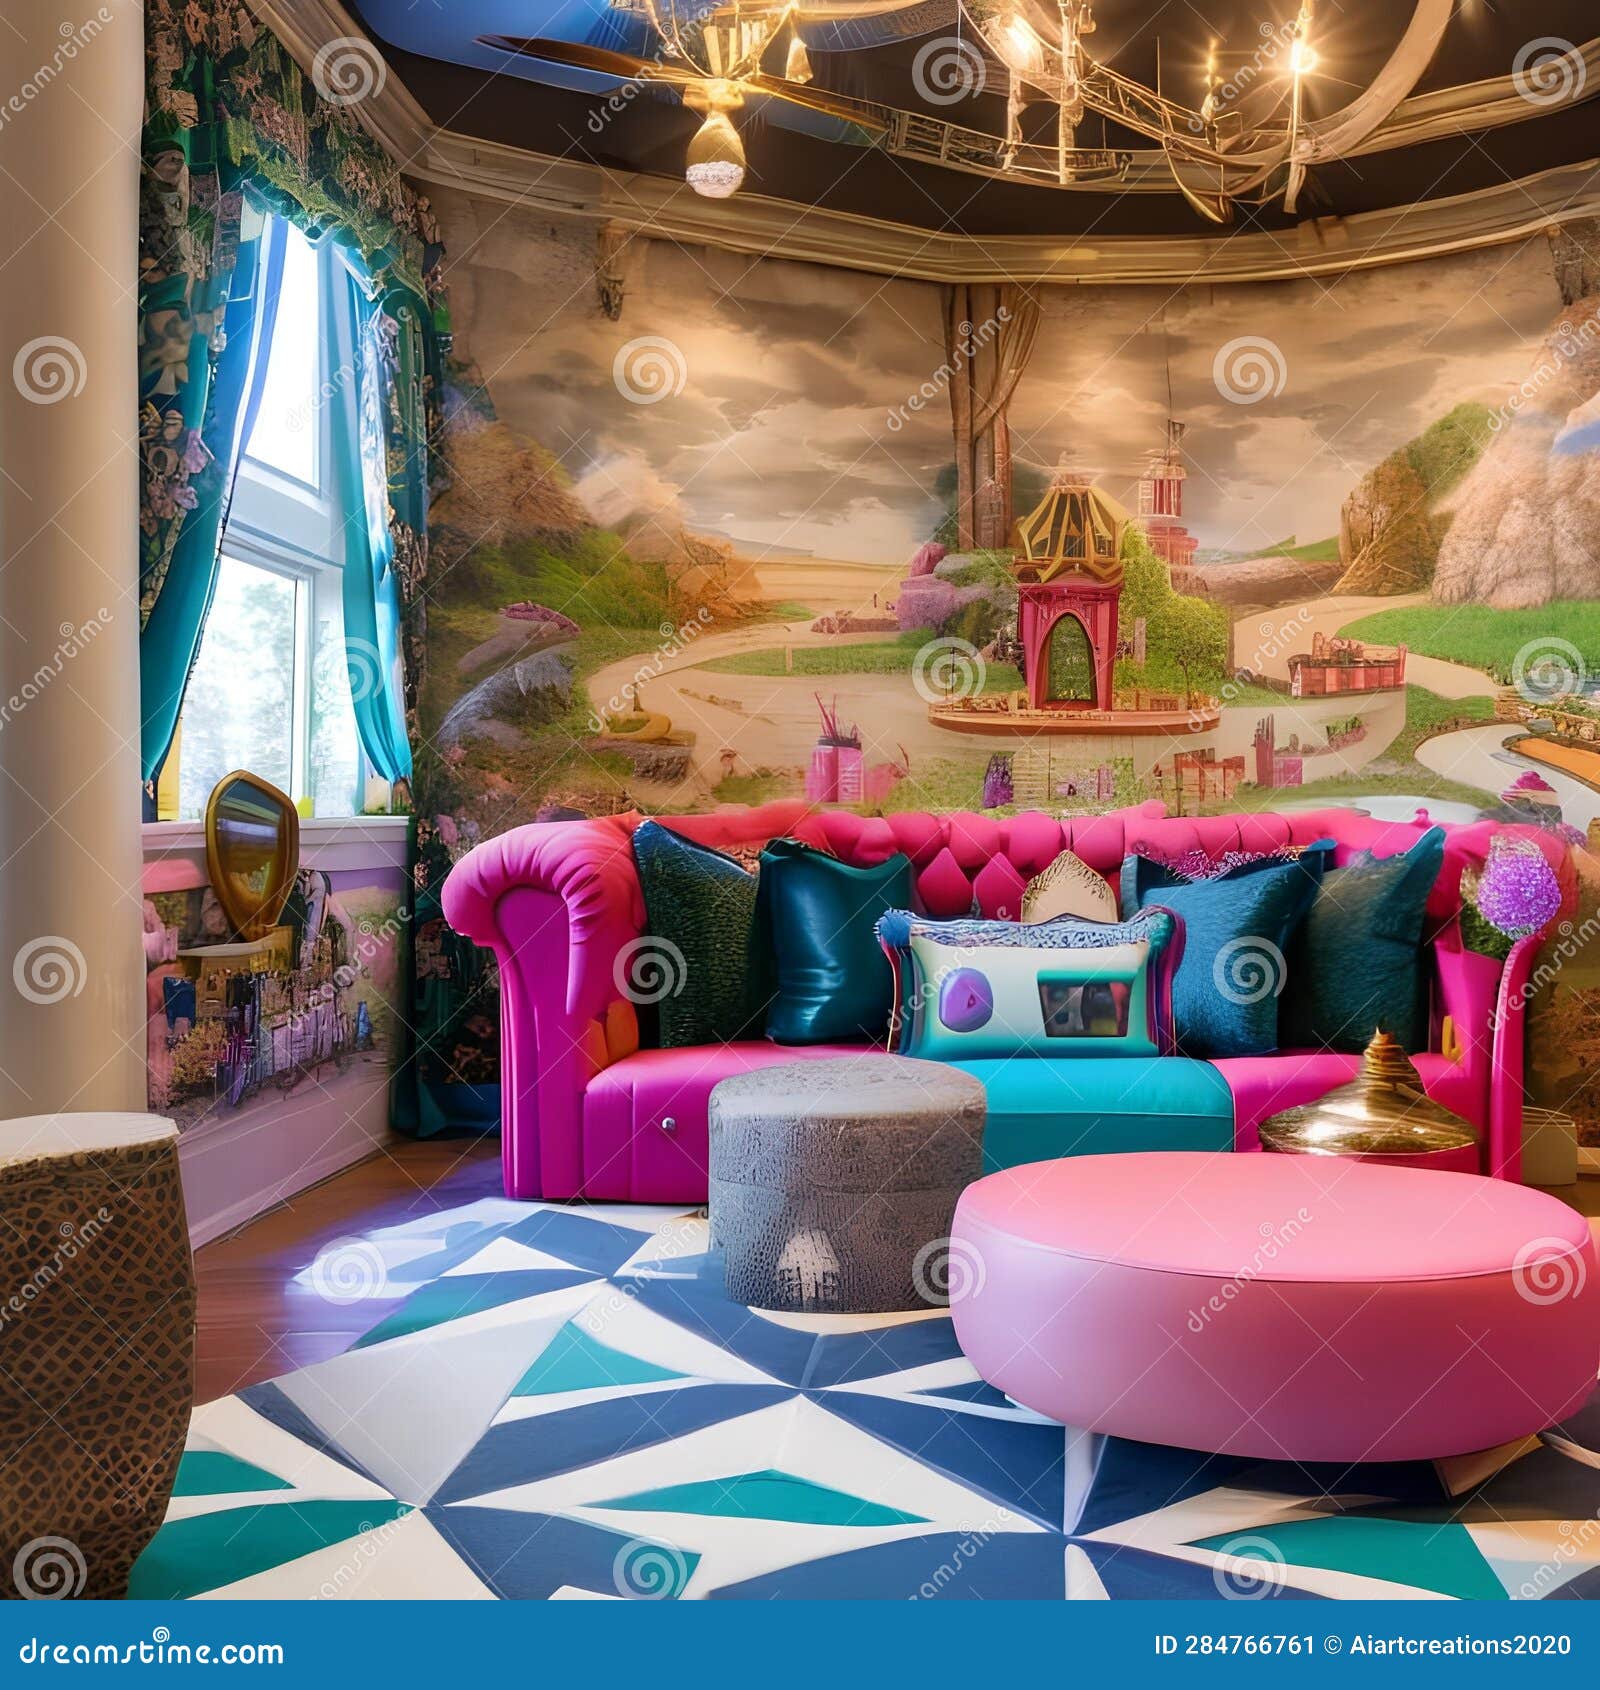 A Whimsical Alice in Wonderland-themed Playroom with Oversized